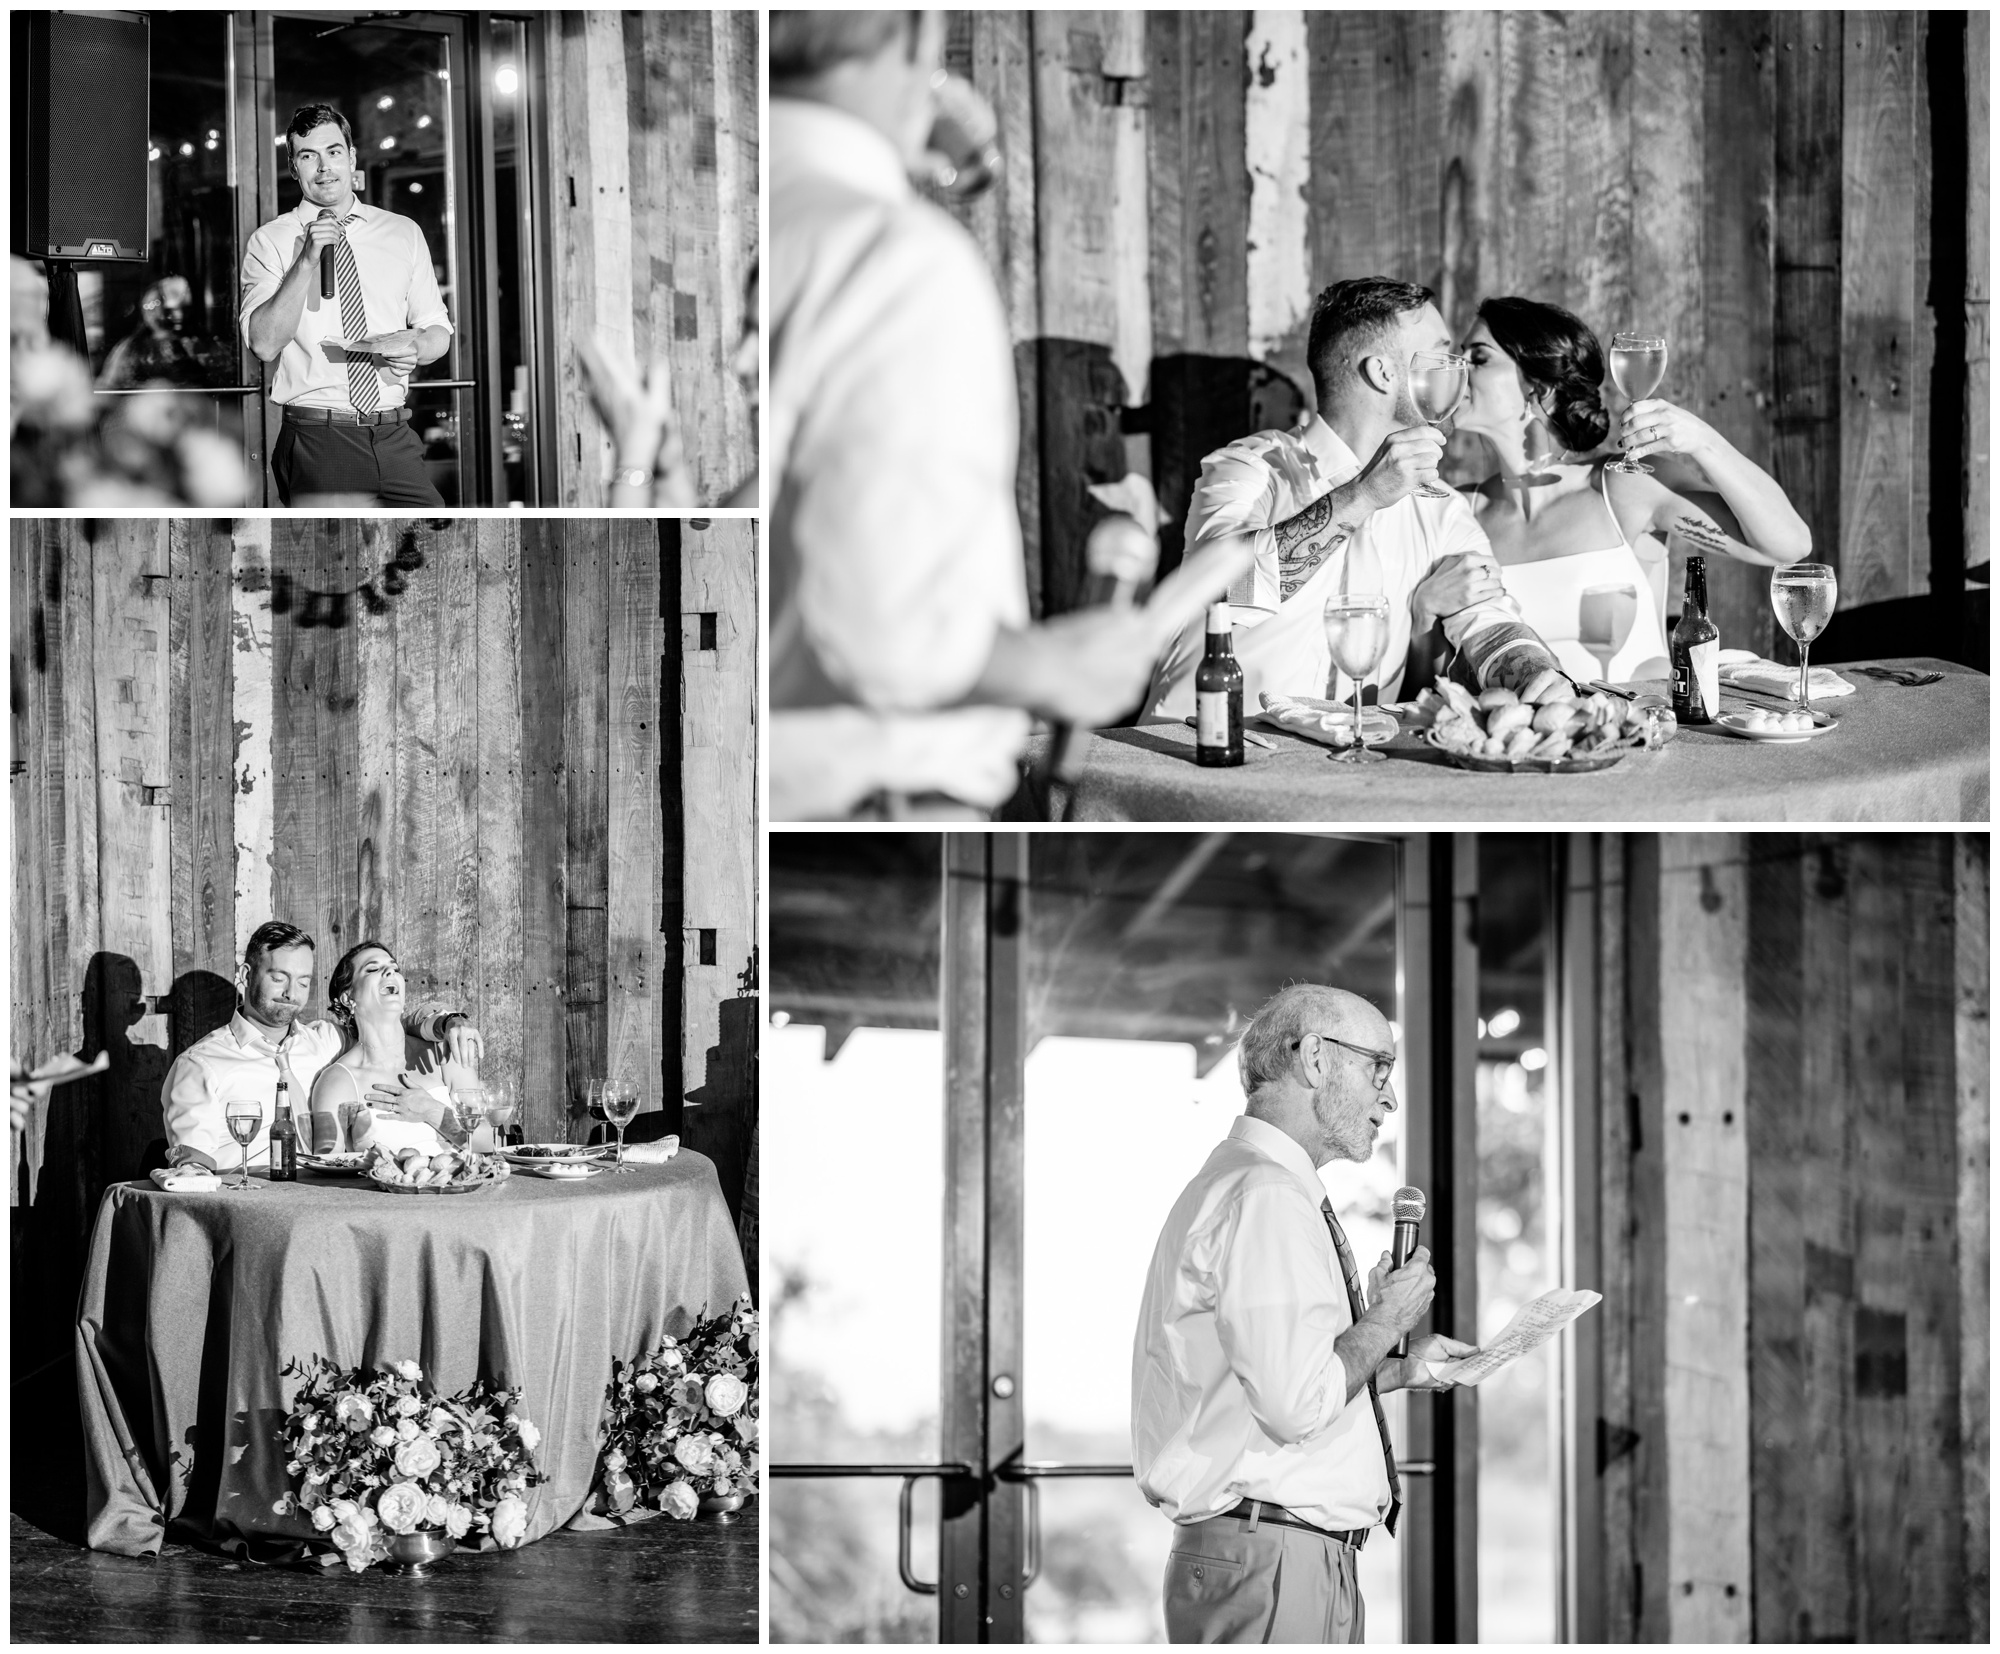 Winery at Bull Run summer wedding, summer winery wedding, vineyard wedding, Winery at Bull Run wedding, Virginia winery wedding, Virginia vineyard wedding, outdoor summer wedding, natural light wedding photography, Centreville Virginia, northern Virginia wedding, blue and white aesthetic, Rachel E.H. Photography, Virginia wedding photographer, couple kissing, couple at reception table, black and white